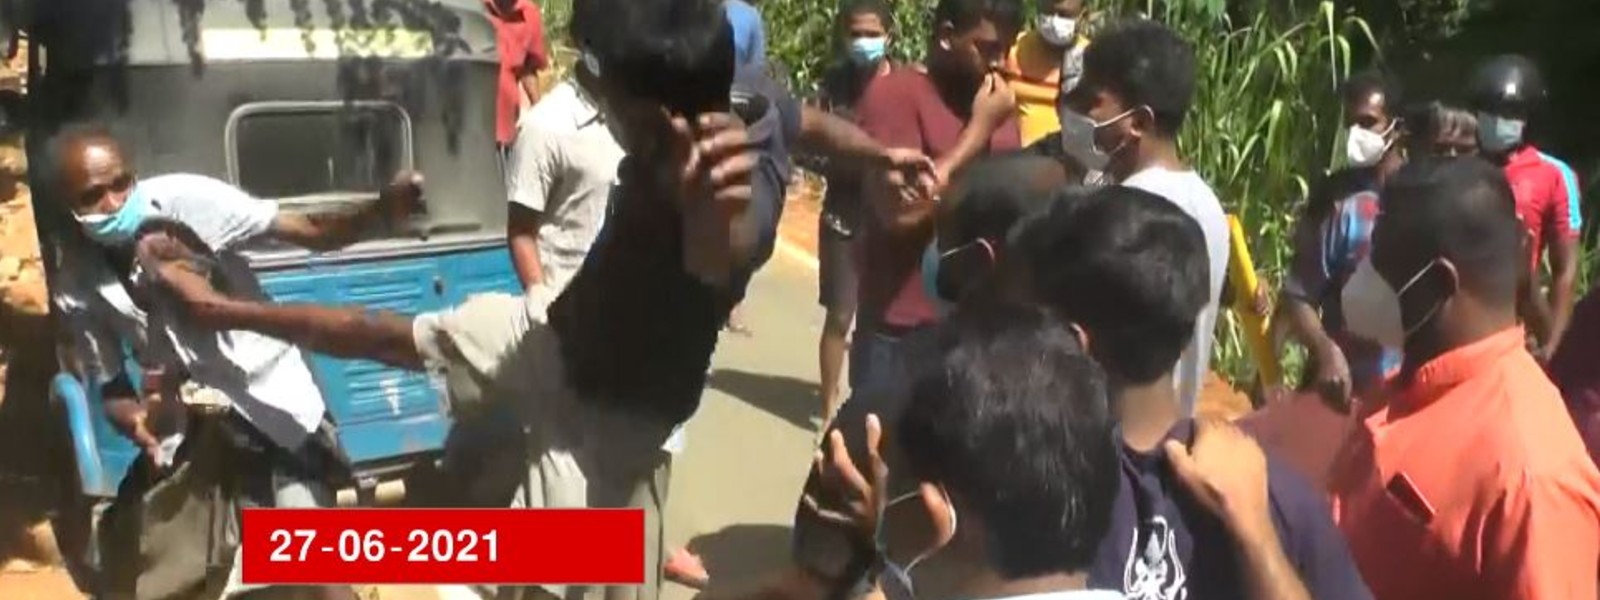 Locals take to streets against politician for assault